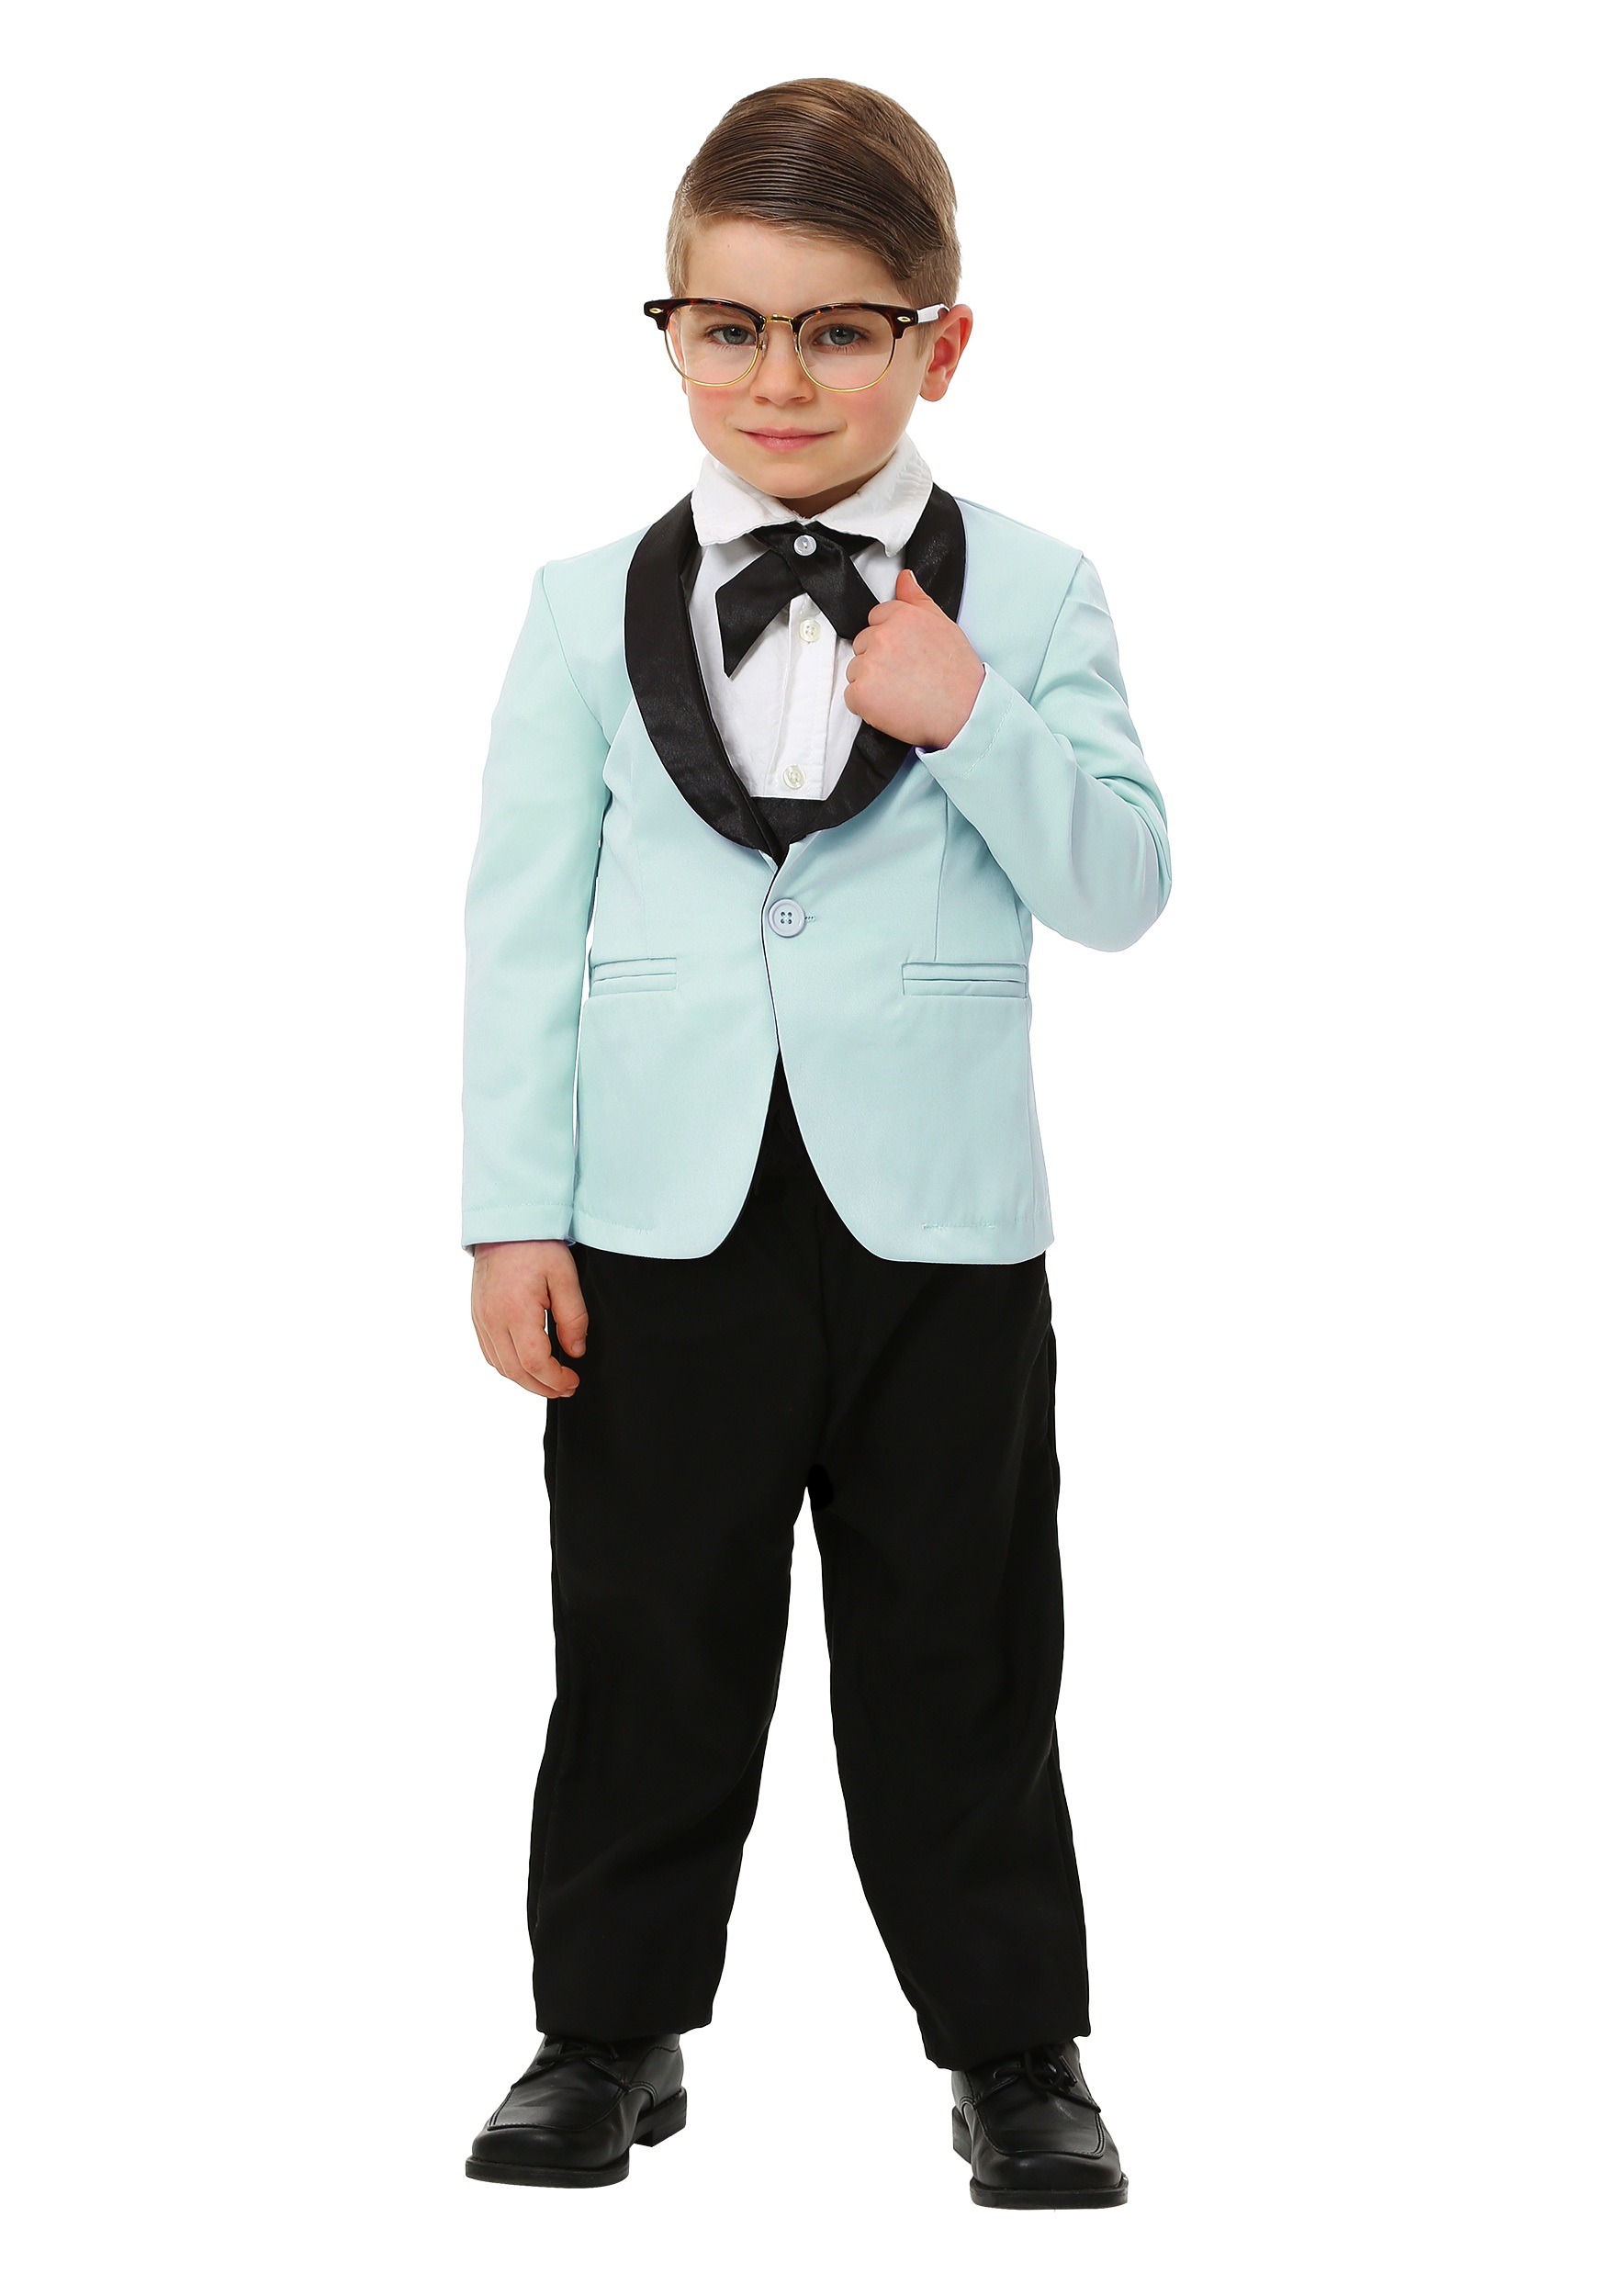 https://images.halloweencostumes.ca/products/38193/1-1/toddler-mr-50s-costume.jpg